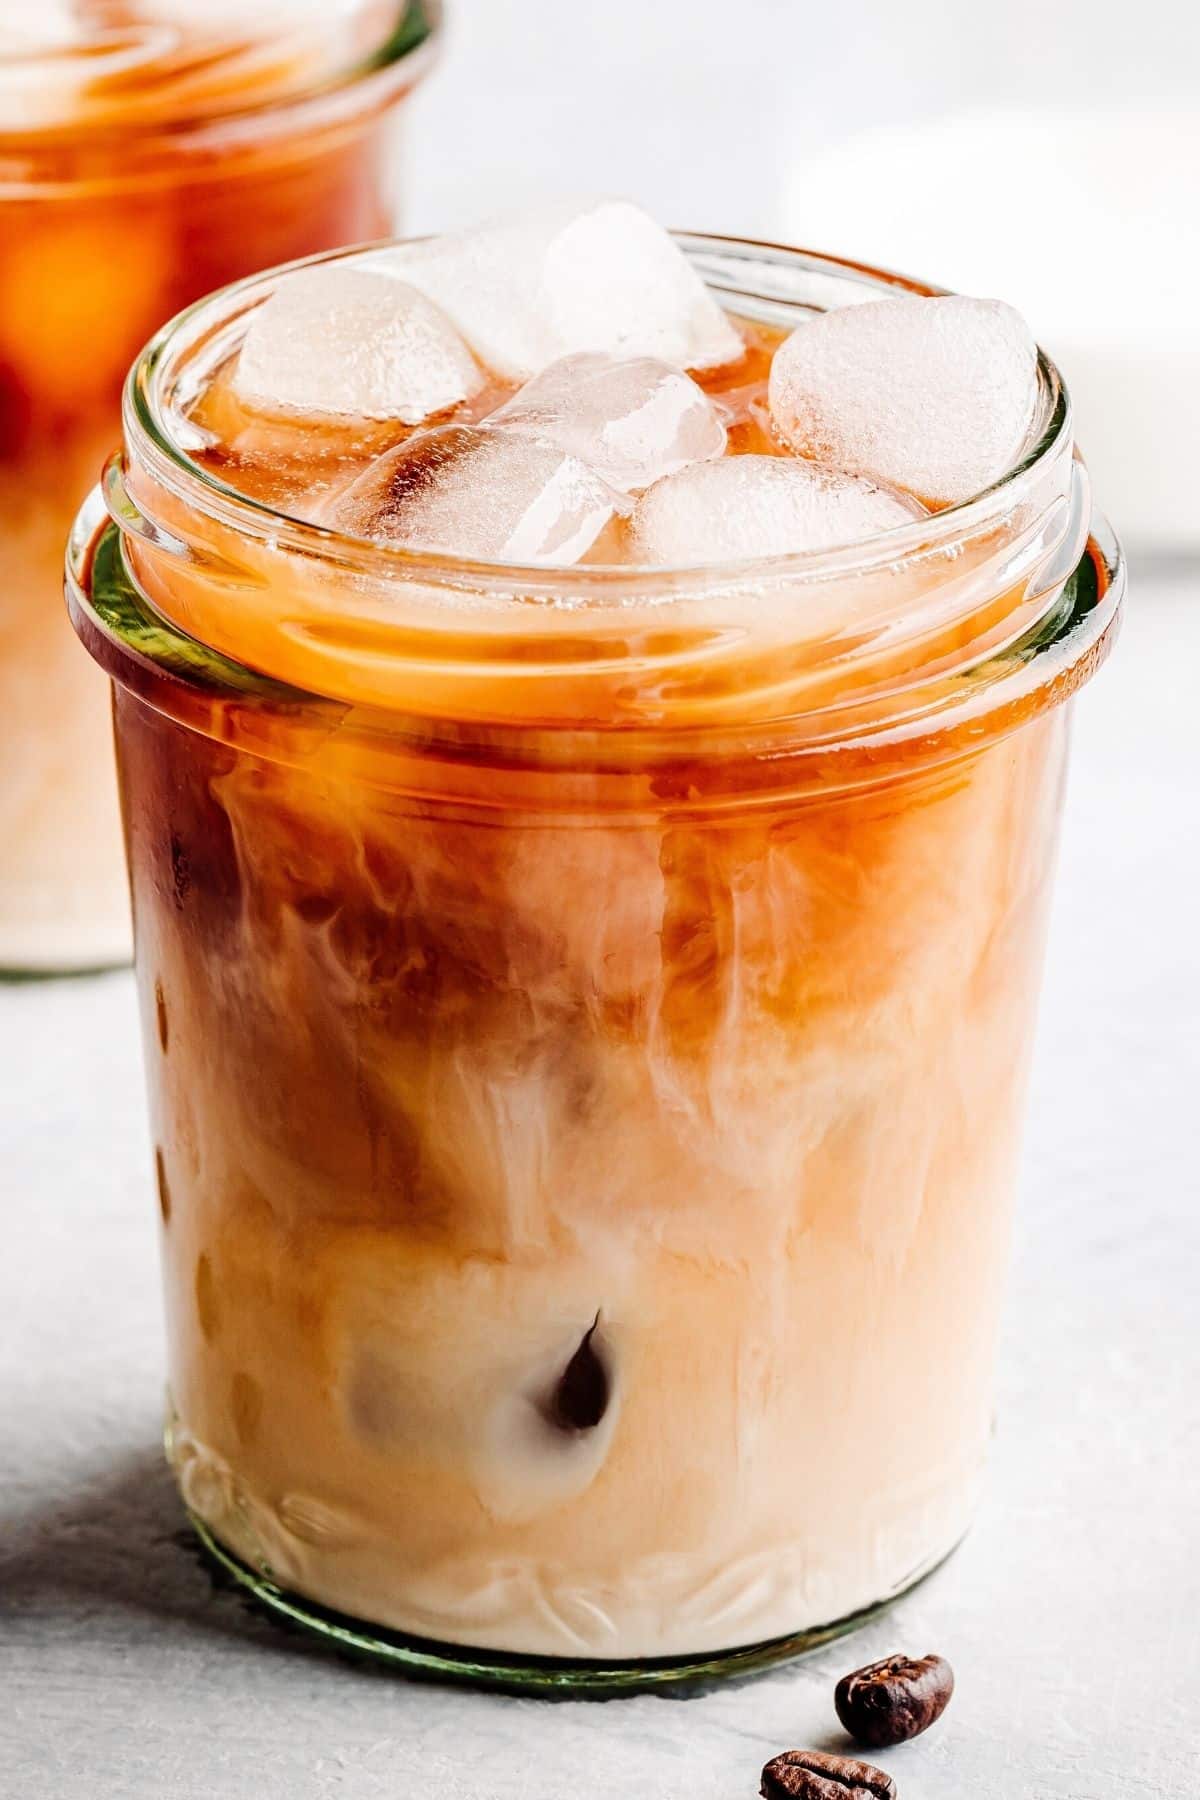 creamy iced coffee served in a pretty glass.